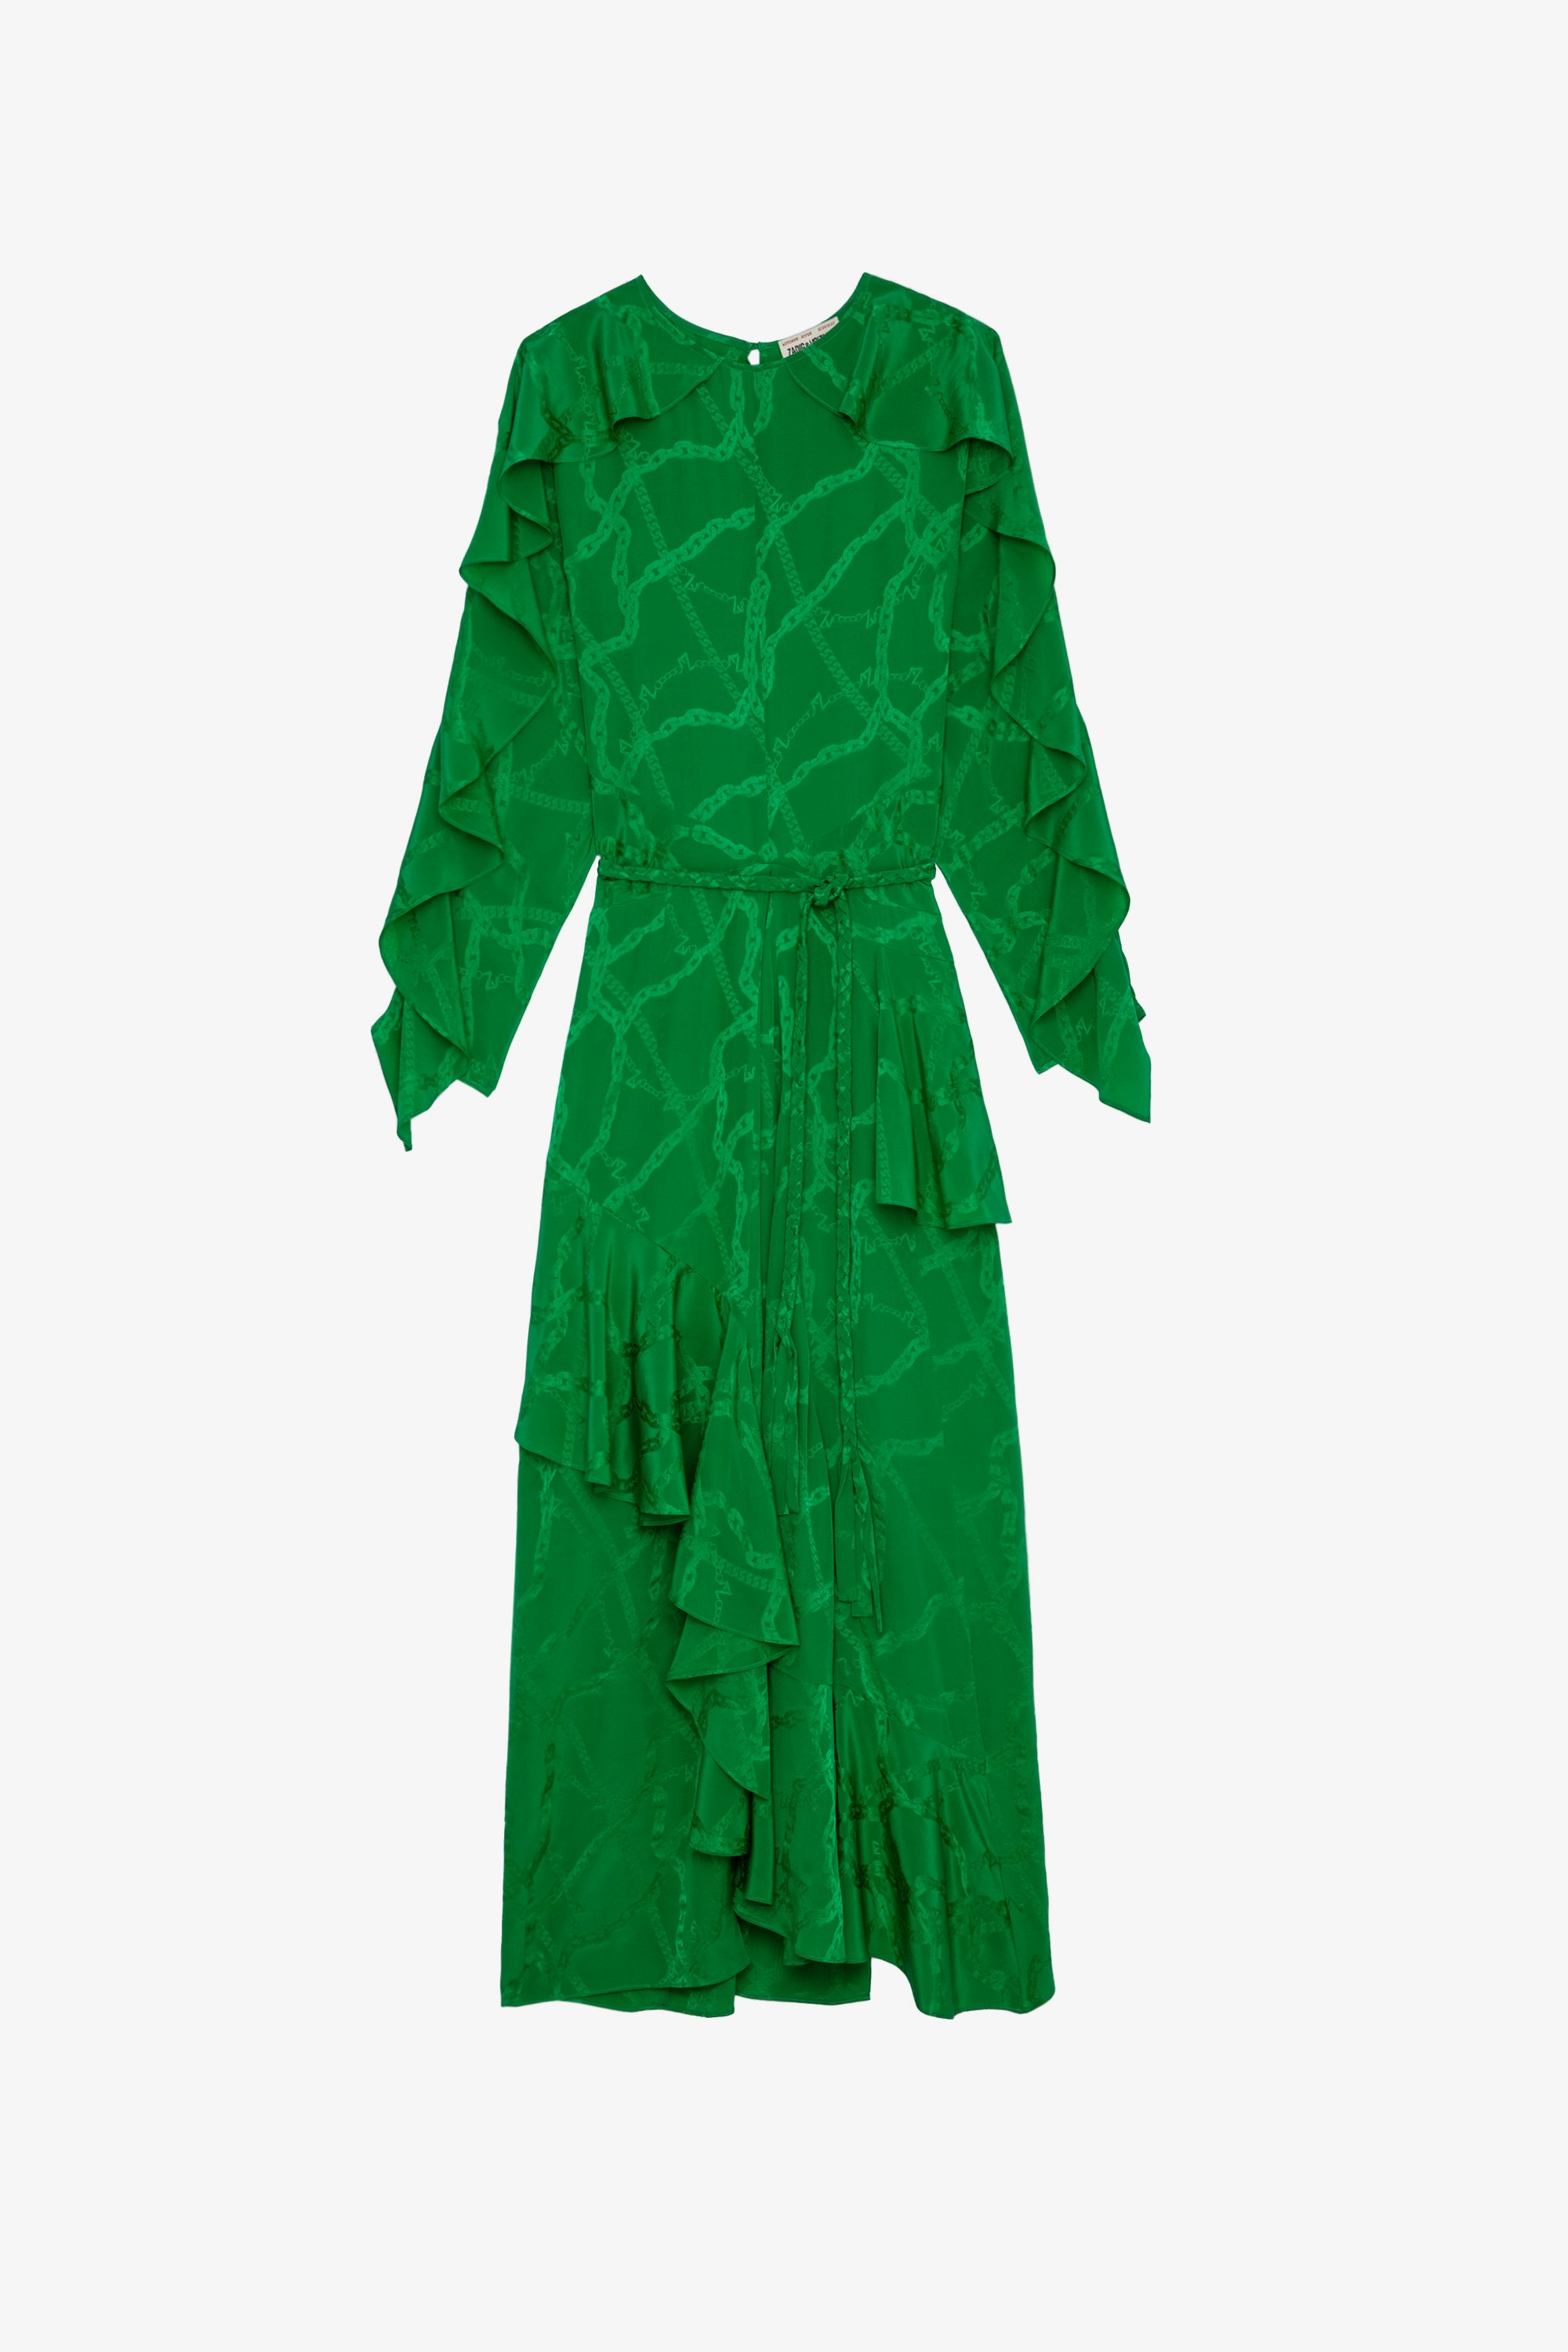 Ritana Chains シルク ワンピース Women’s long green silk dress with draped effect, decorated with jacquard ZV chains, tied with a braided belt at the waist 